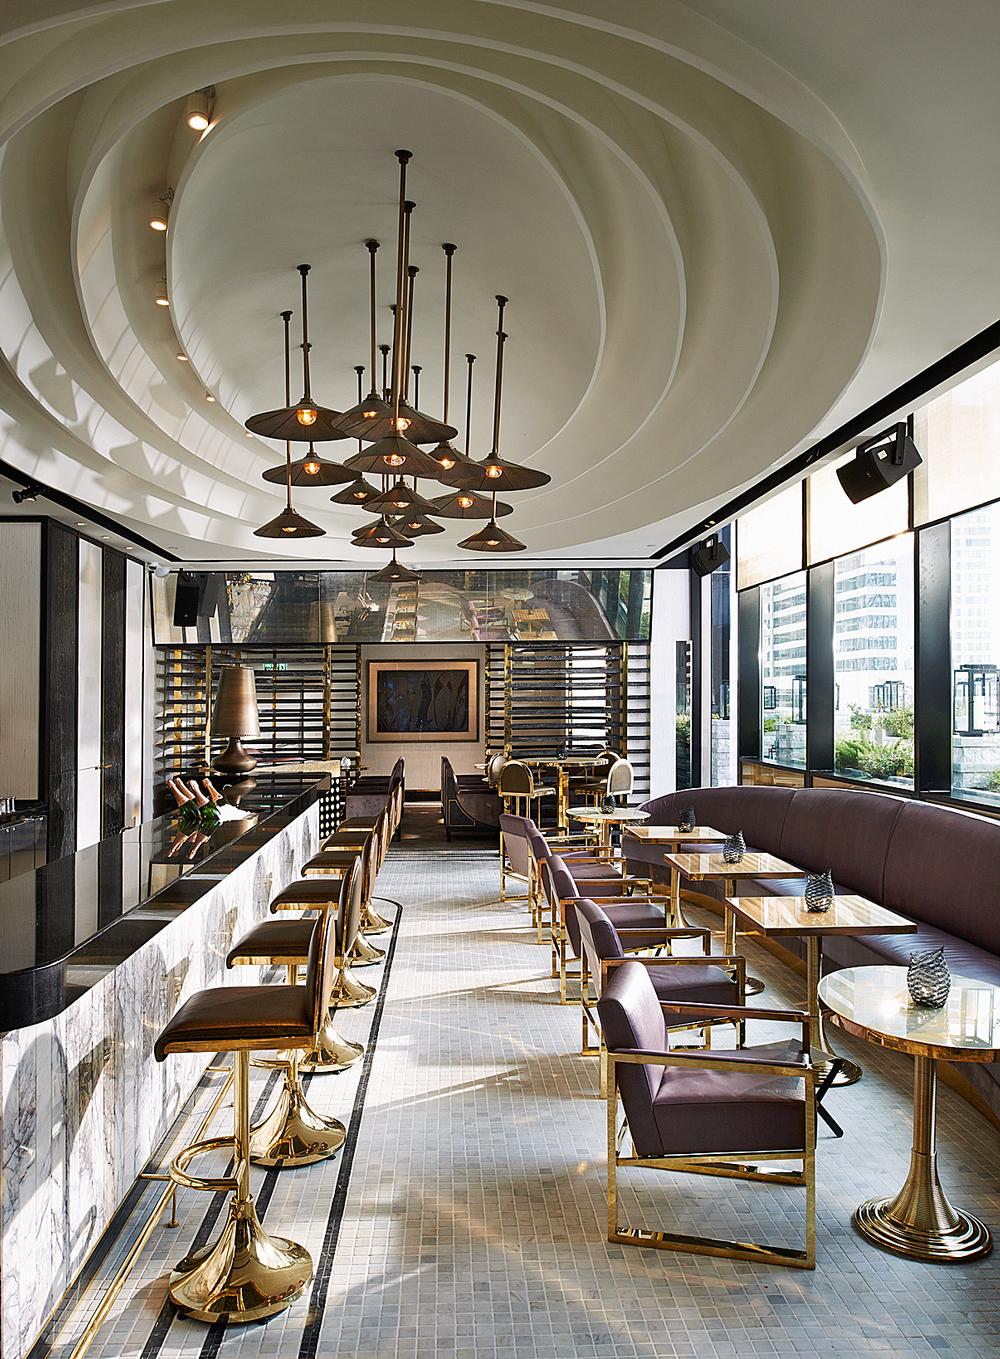 The Vogue Lounge launched on the top floor of the MahaNakhon Cube in Bangkok in 2014